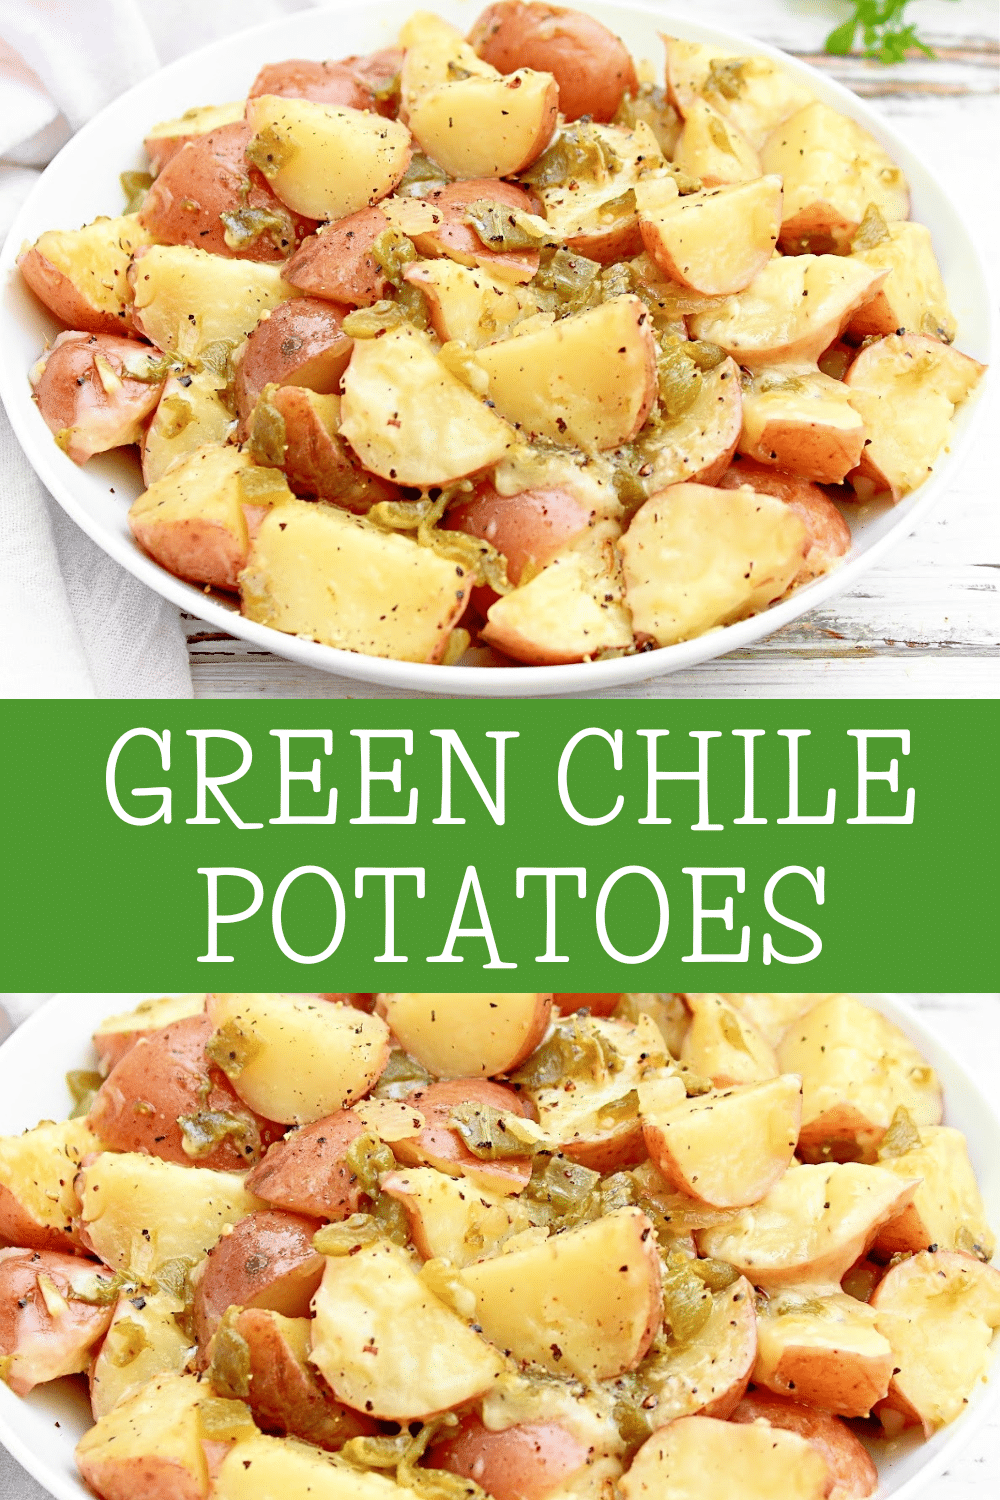 Green Chile Potatoes ~ Easy skillet side dish with cheesy potatoes and smoky green chile peppers. Ready in 20 minutes! via @thiswifecooks